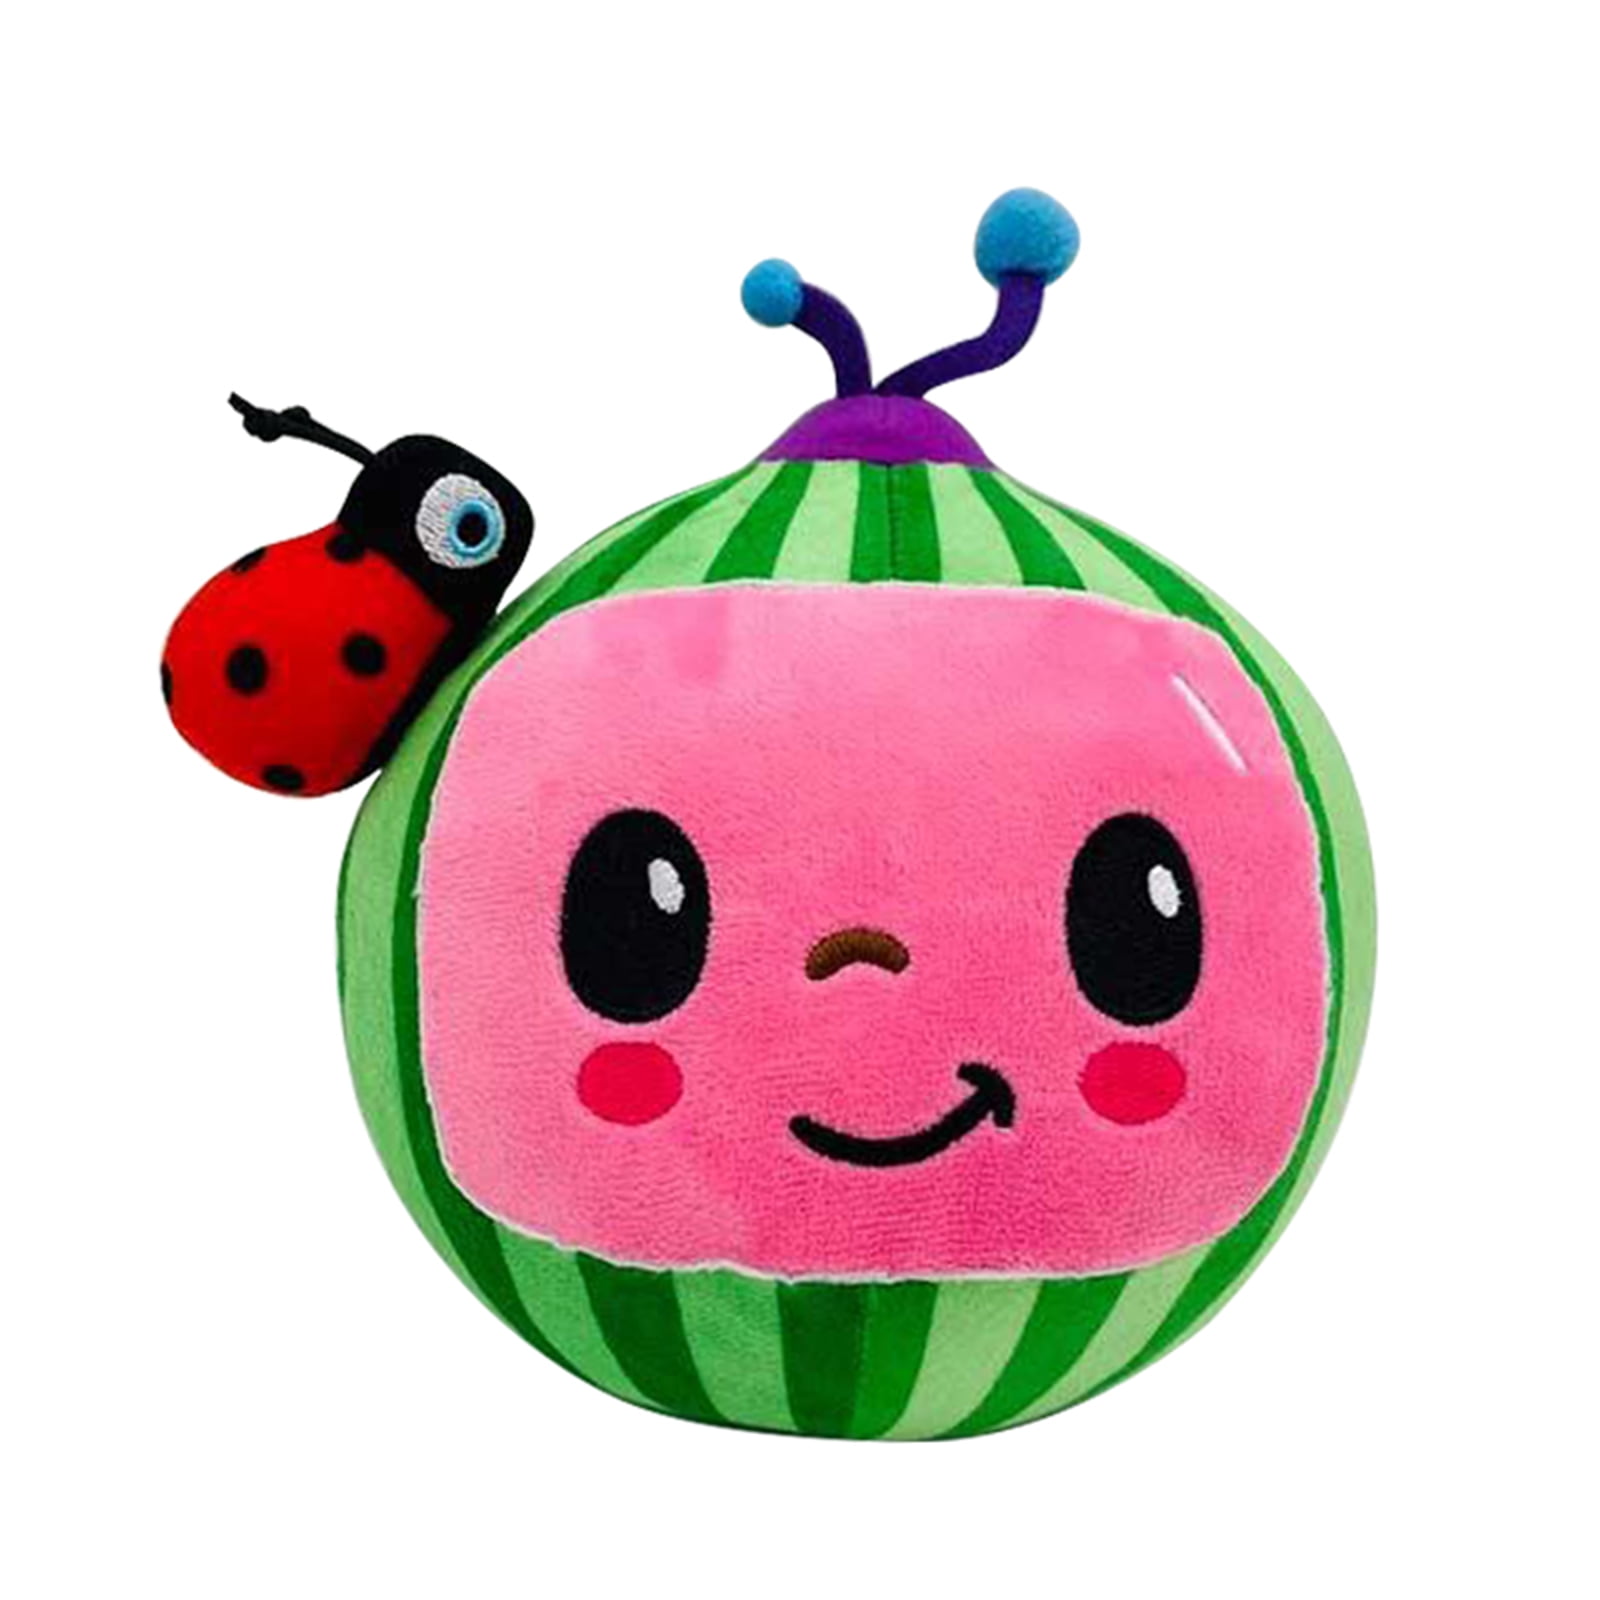 Details about   Cocomelon JJ Plush Toy Boy Watermelon Stuffed Doll Figures Kids Birthday Gift 